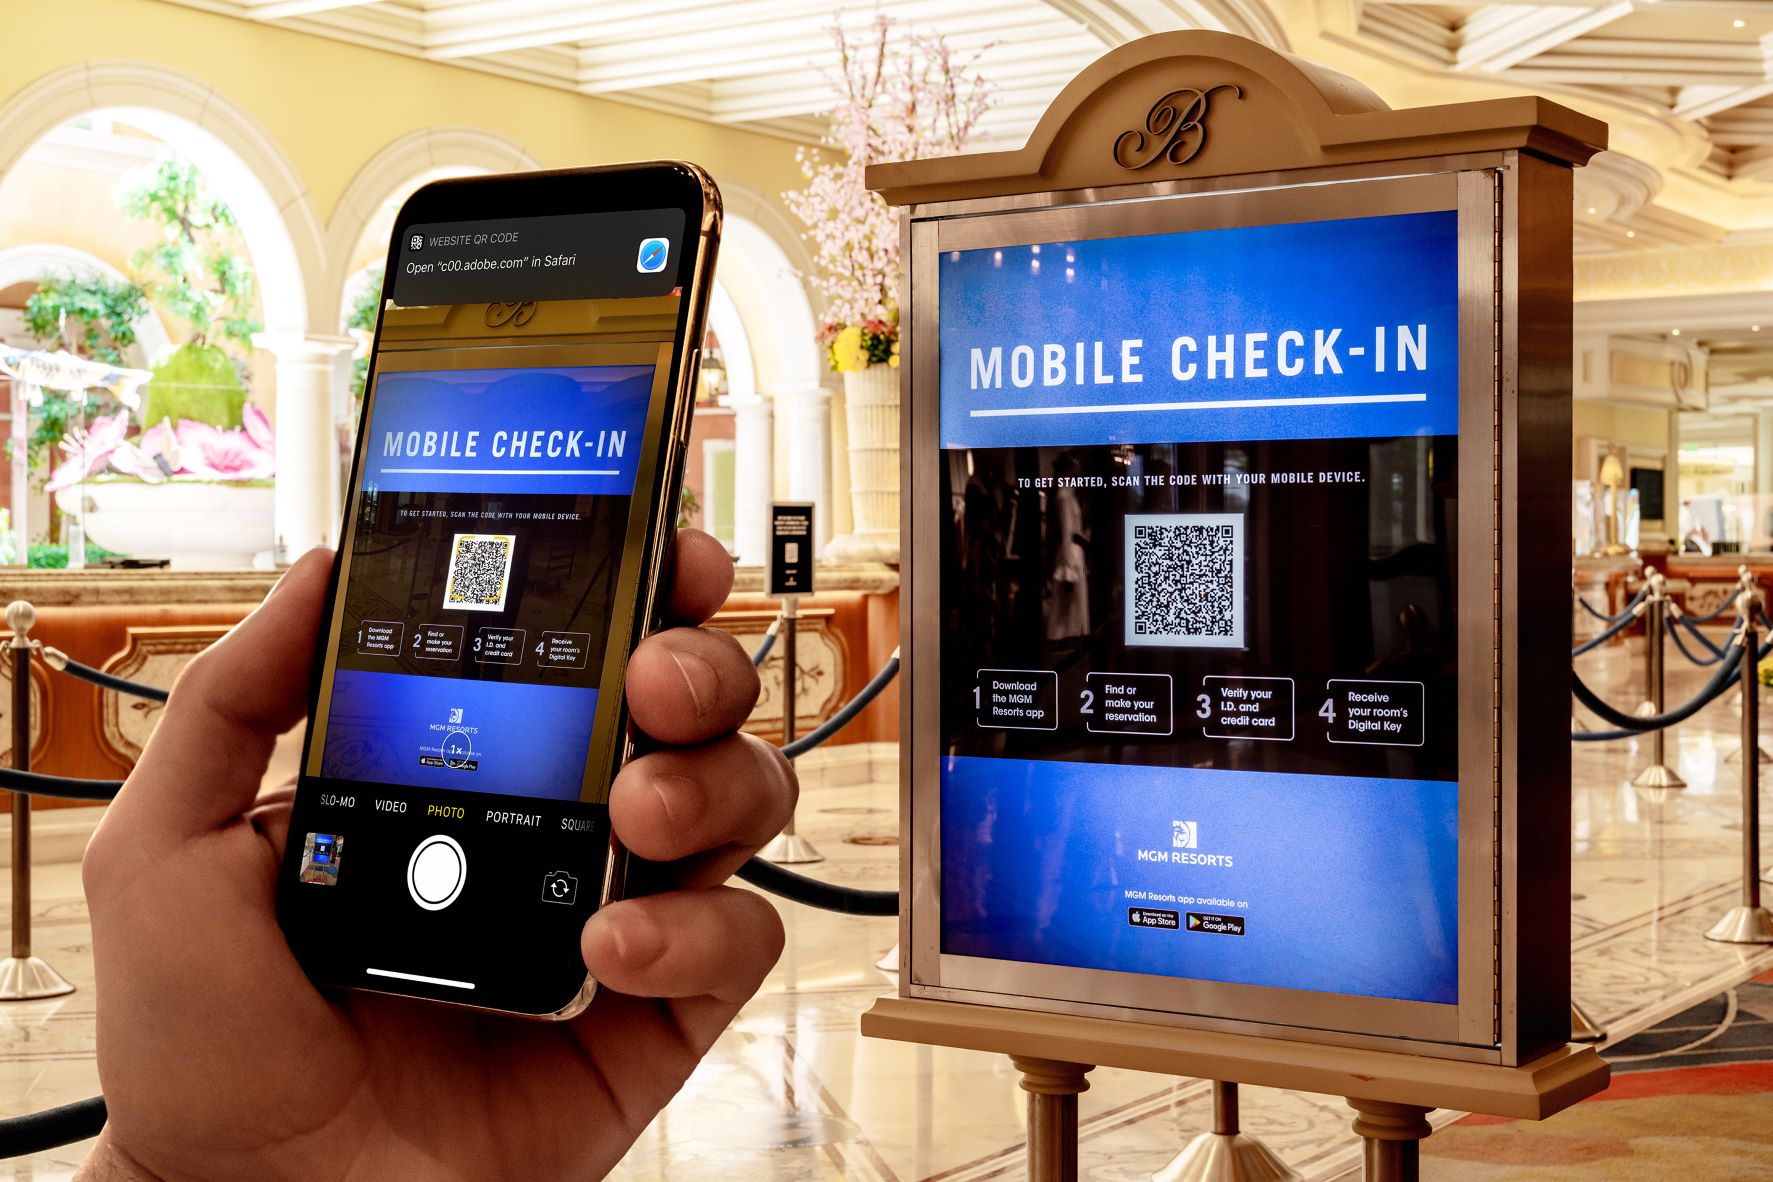 MGM Resorts mobile check in